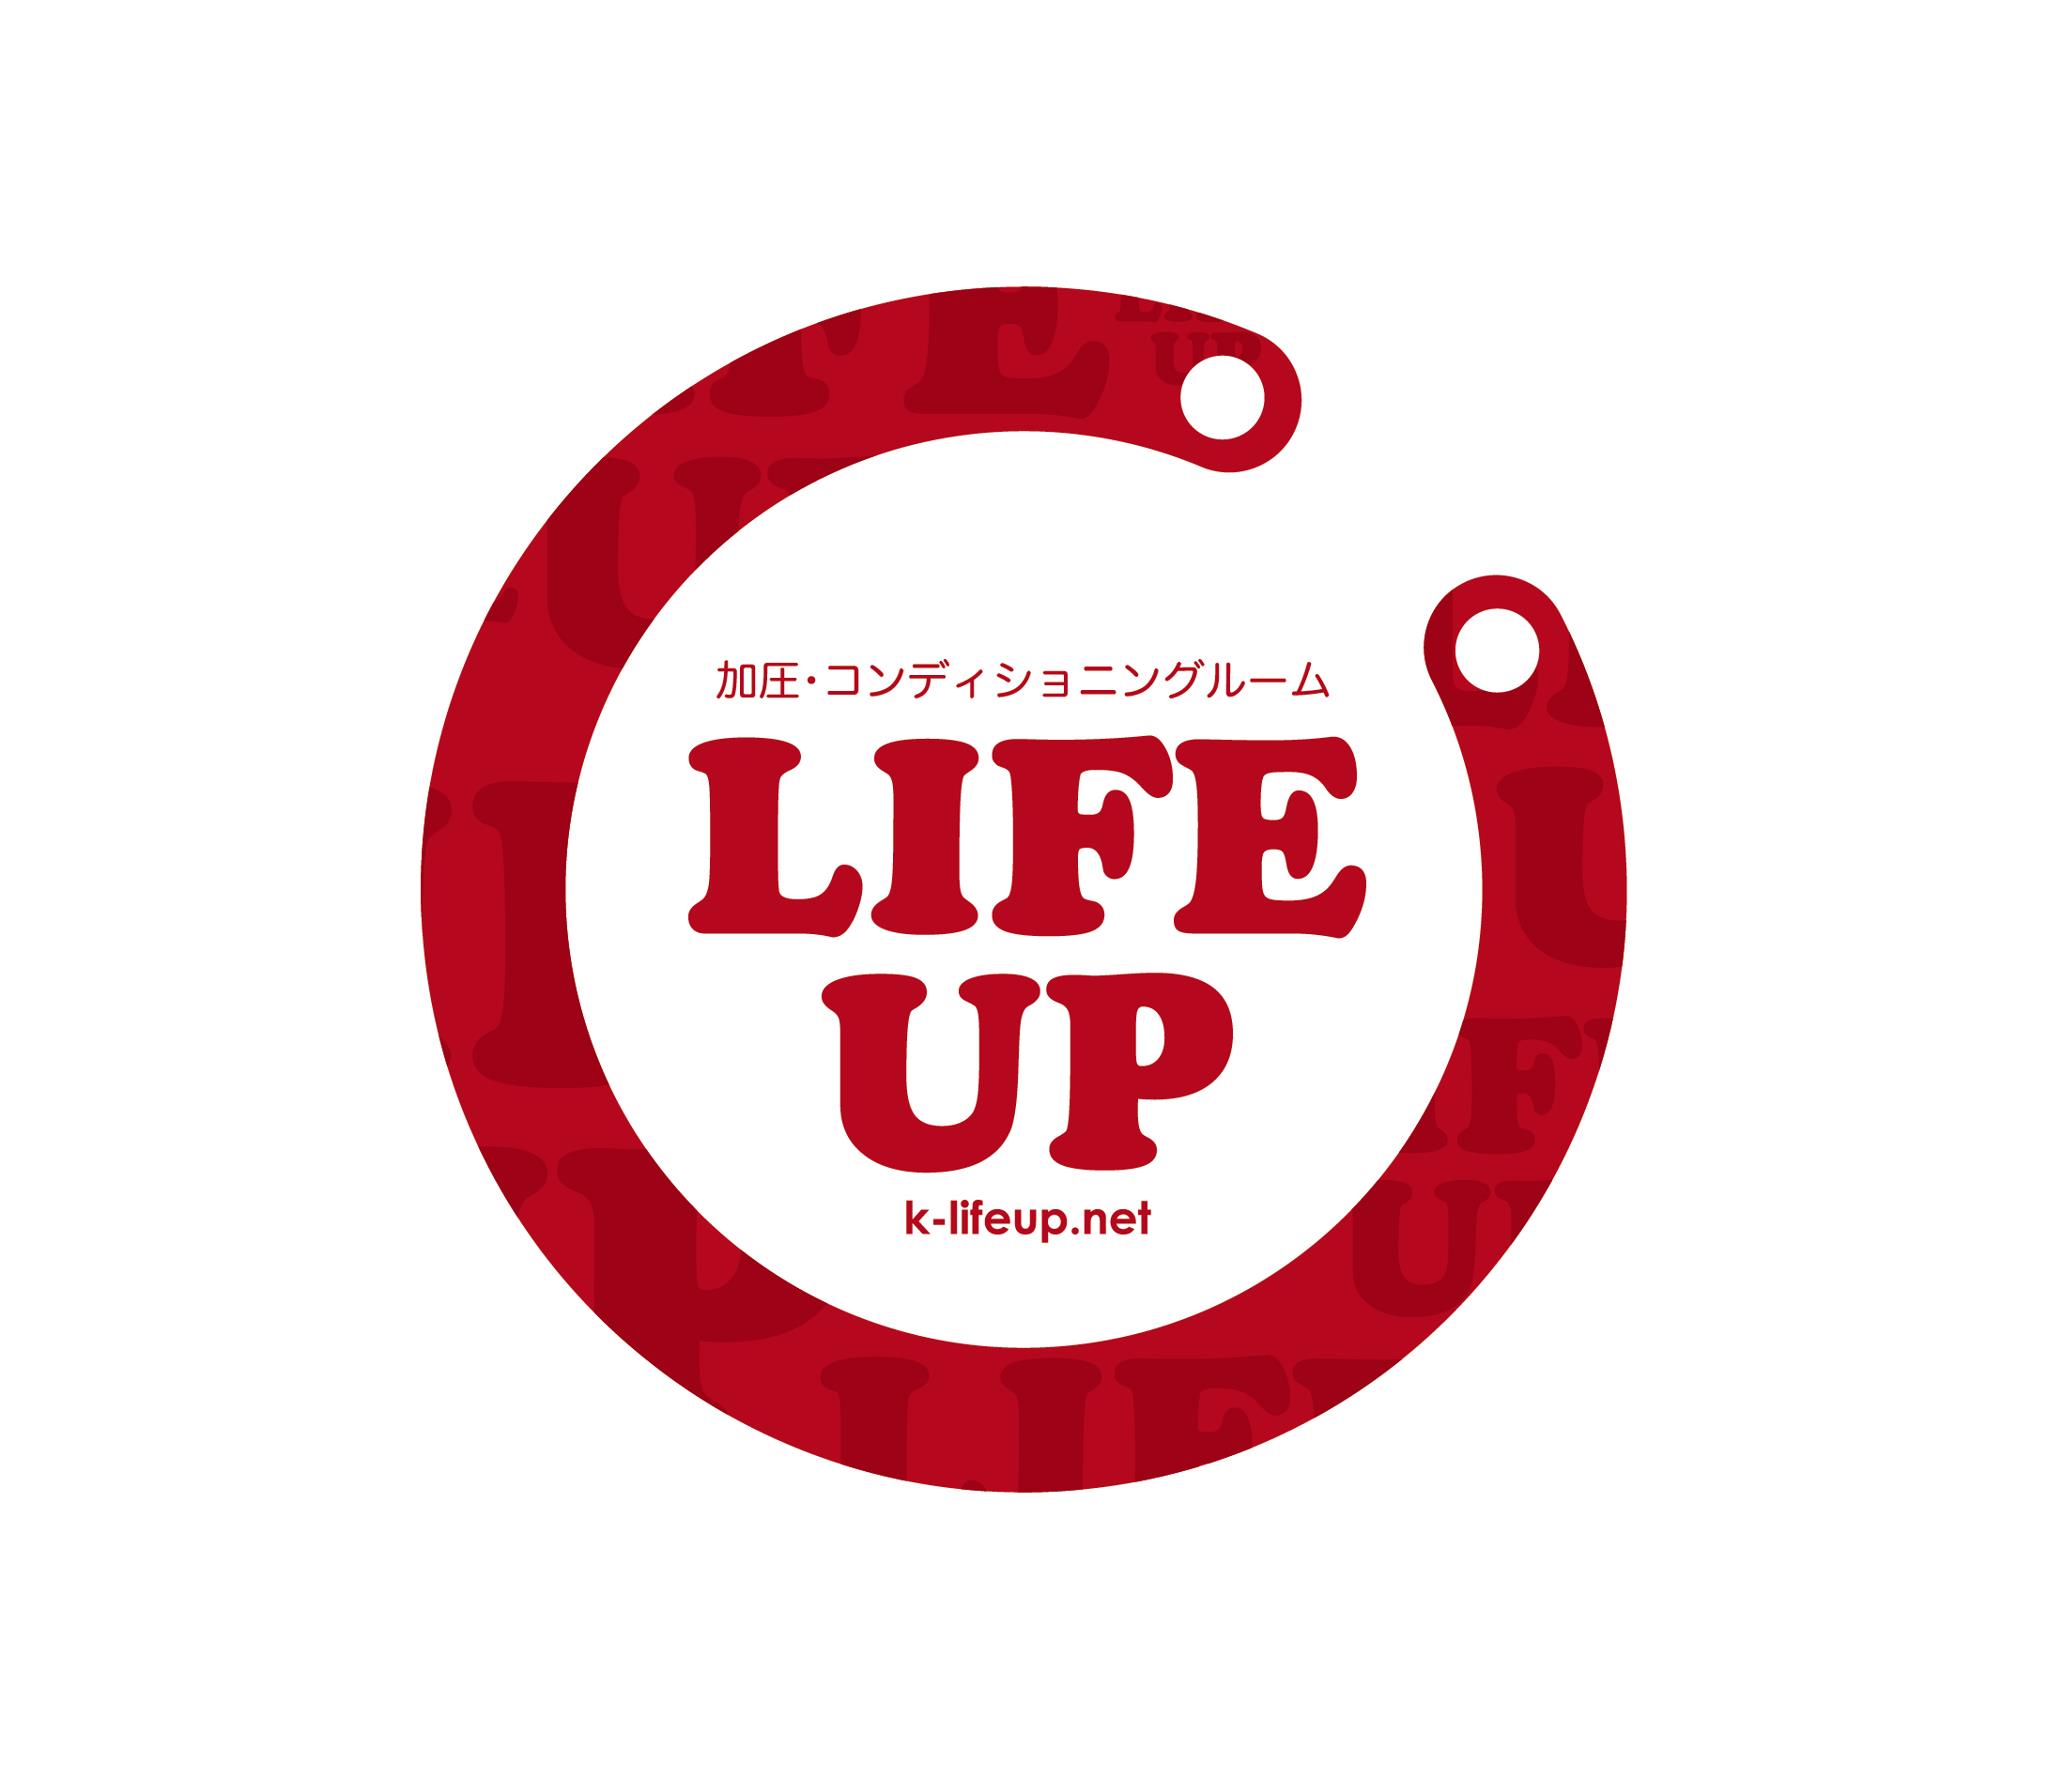 LIFE UP加圧トレーニング